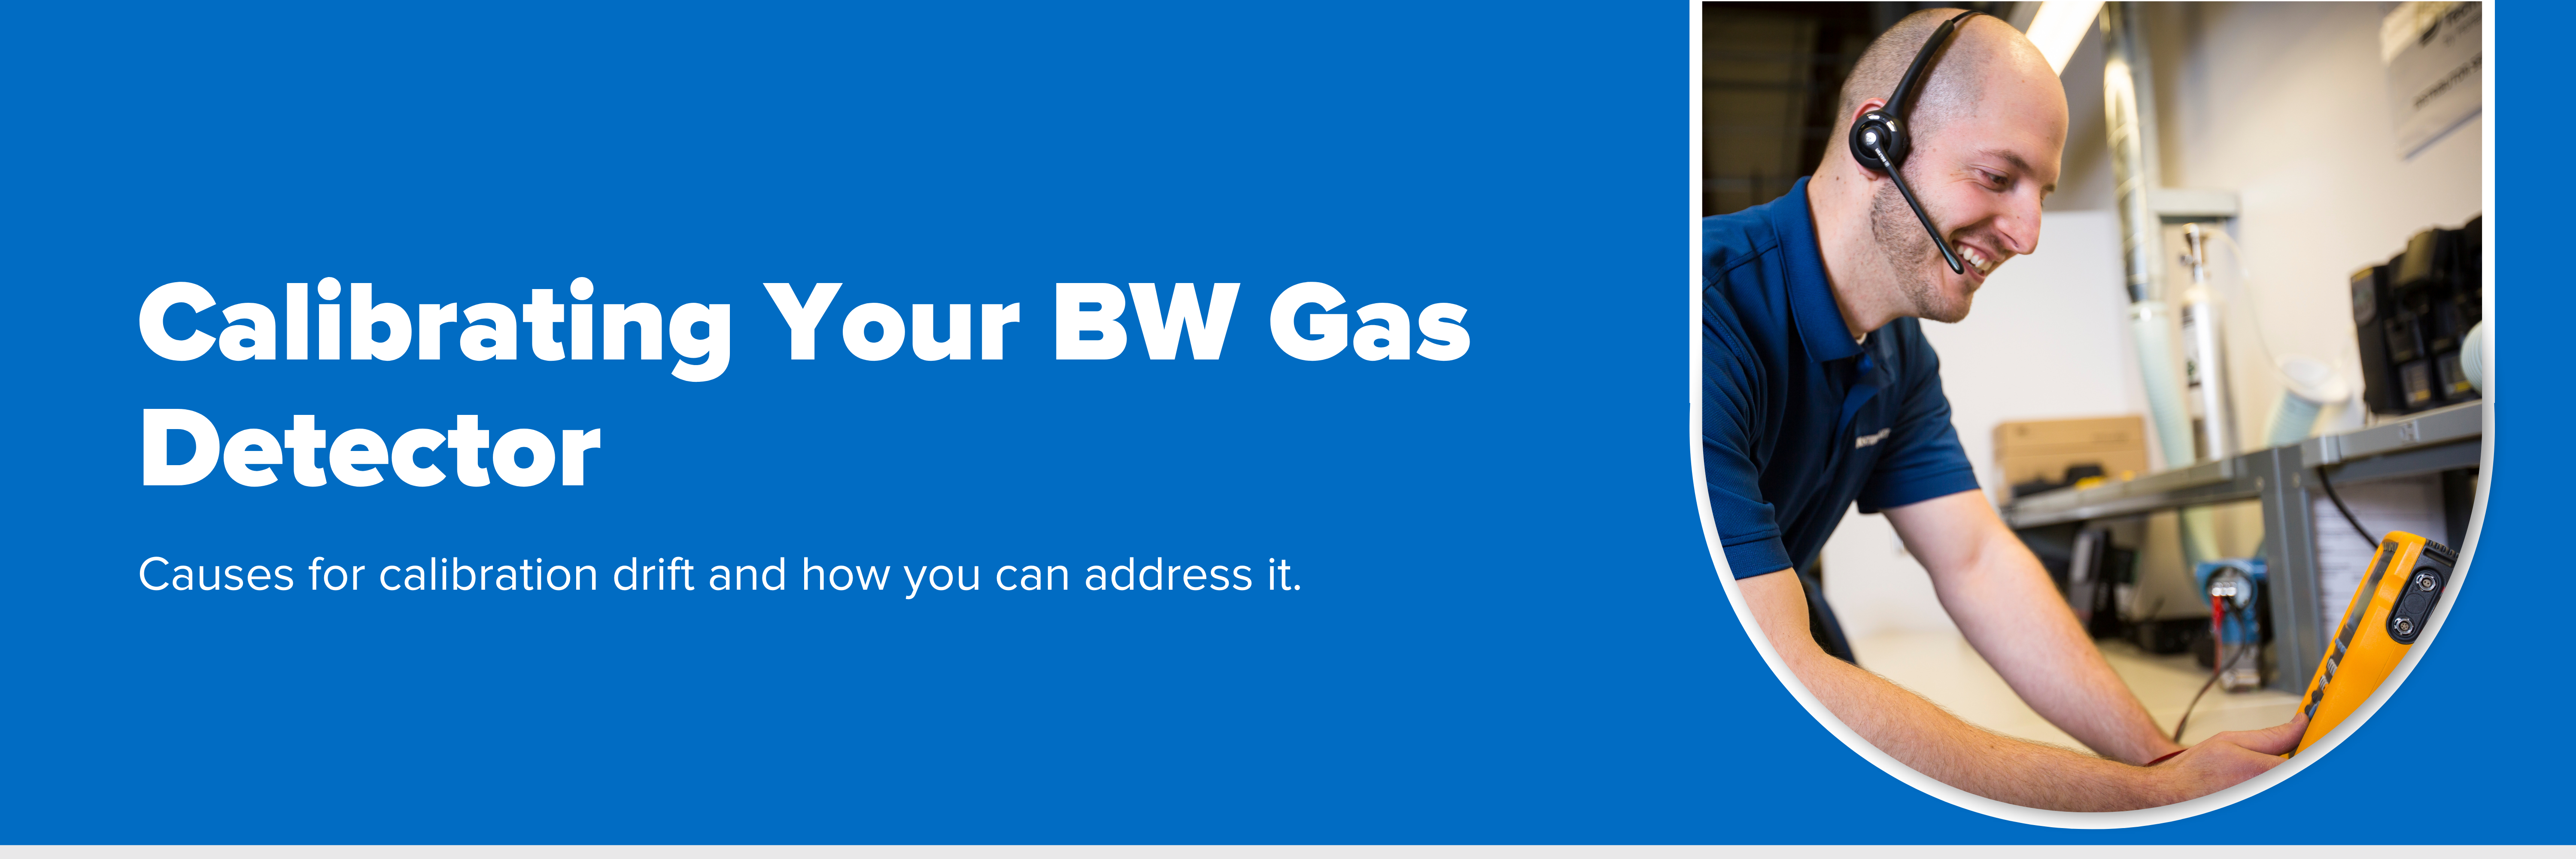 Header image with text "Calibrating Your BW Gas Detector"